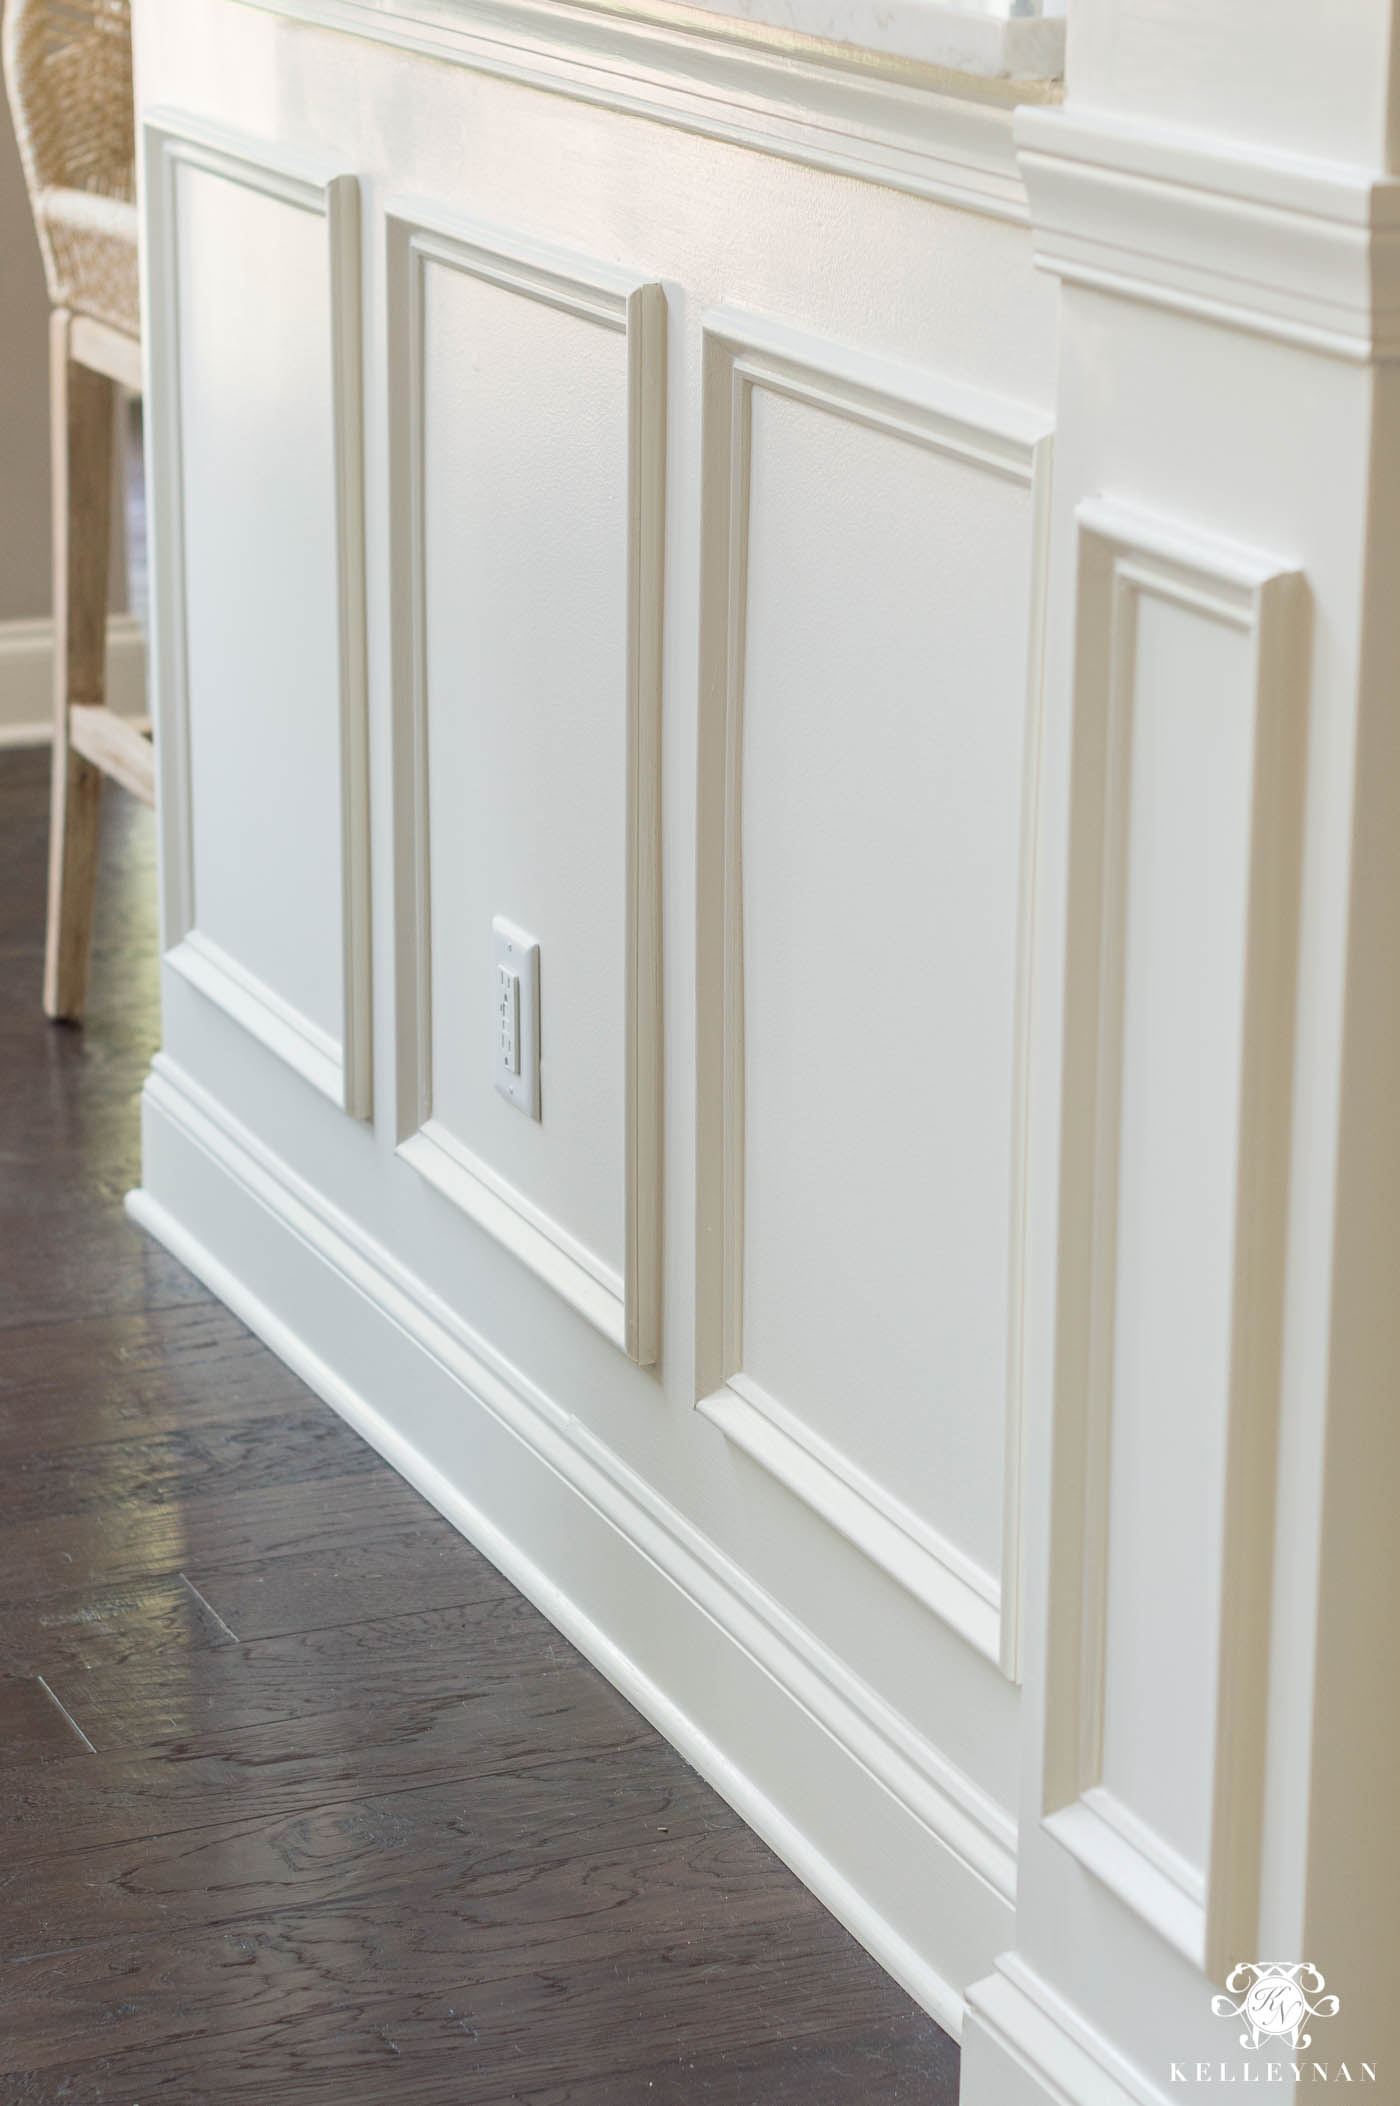 Wall molding and trim ideas to frame in the kitchen with picture frame molding and a column- Creamy by Sherwin Williams